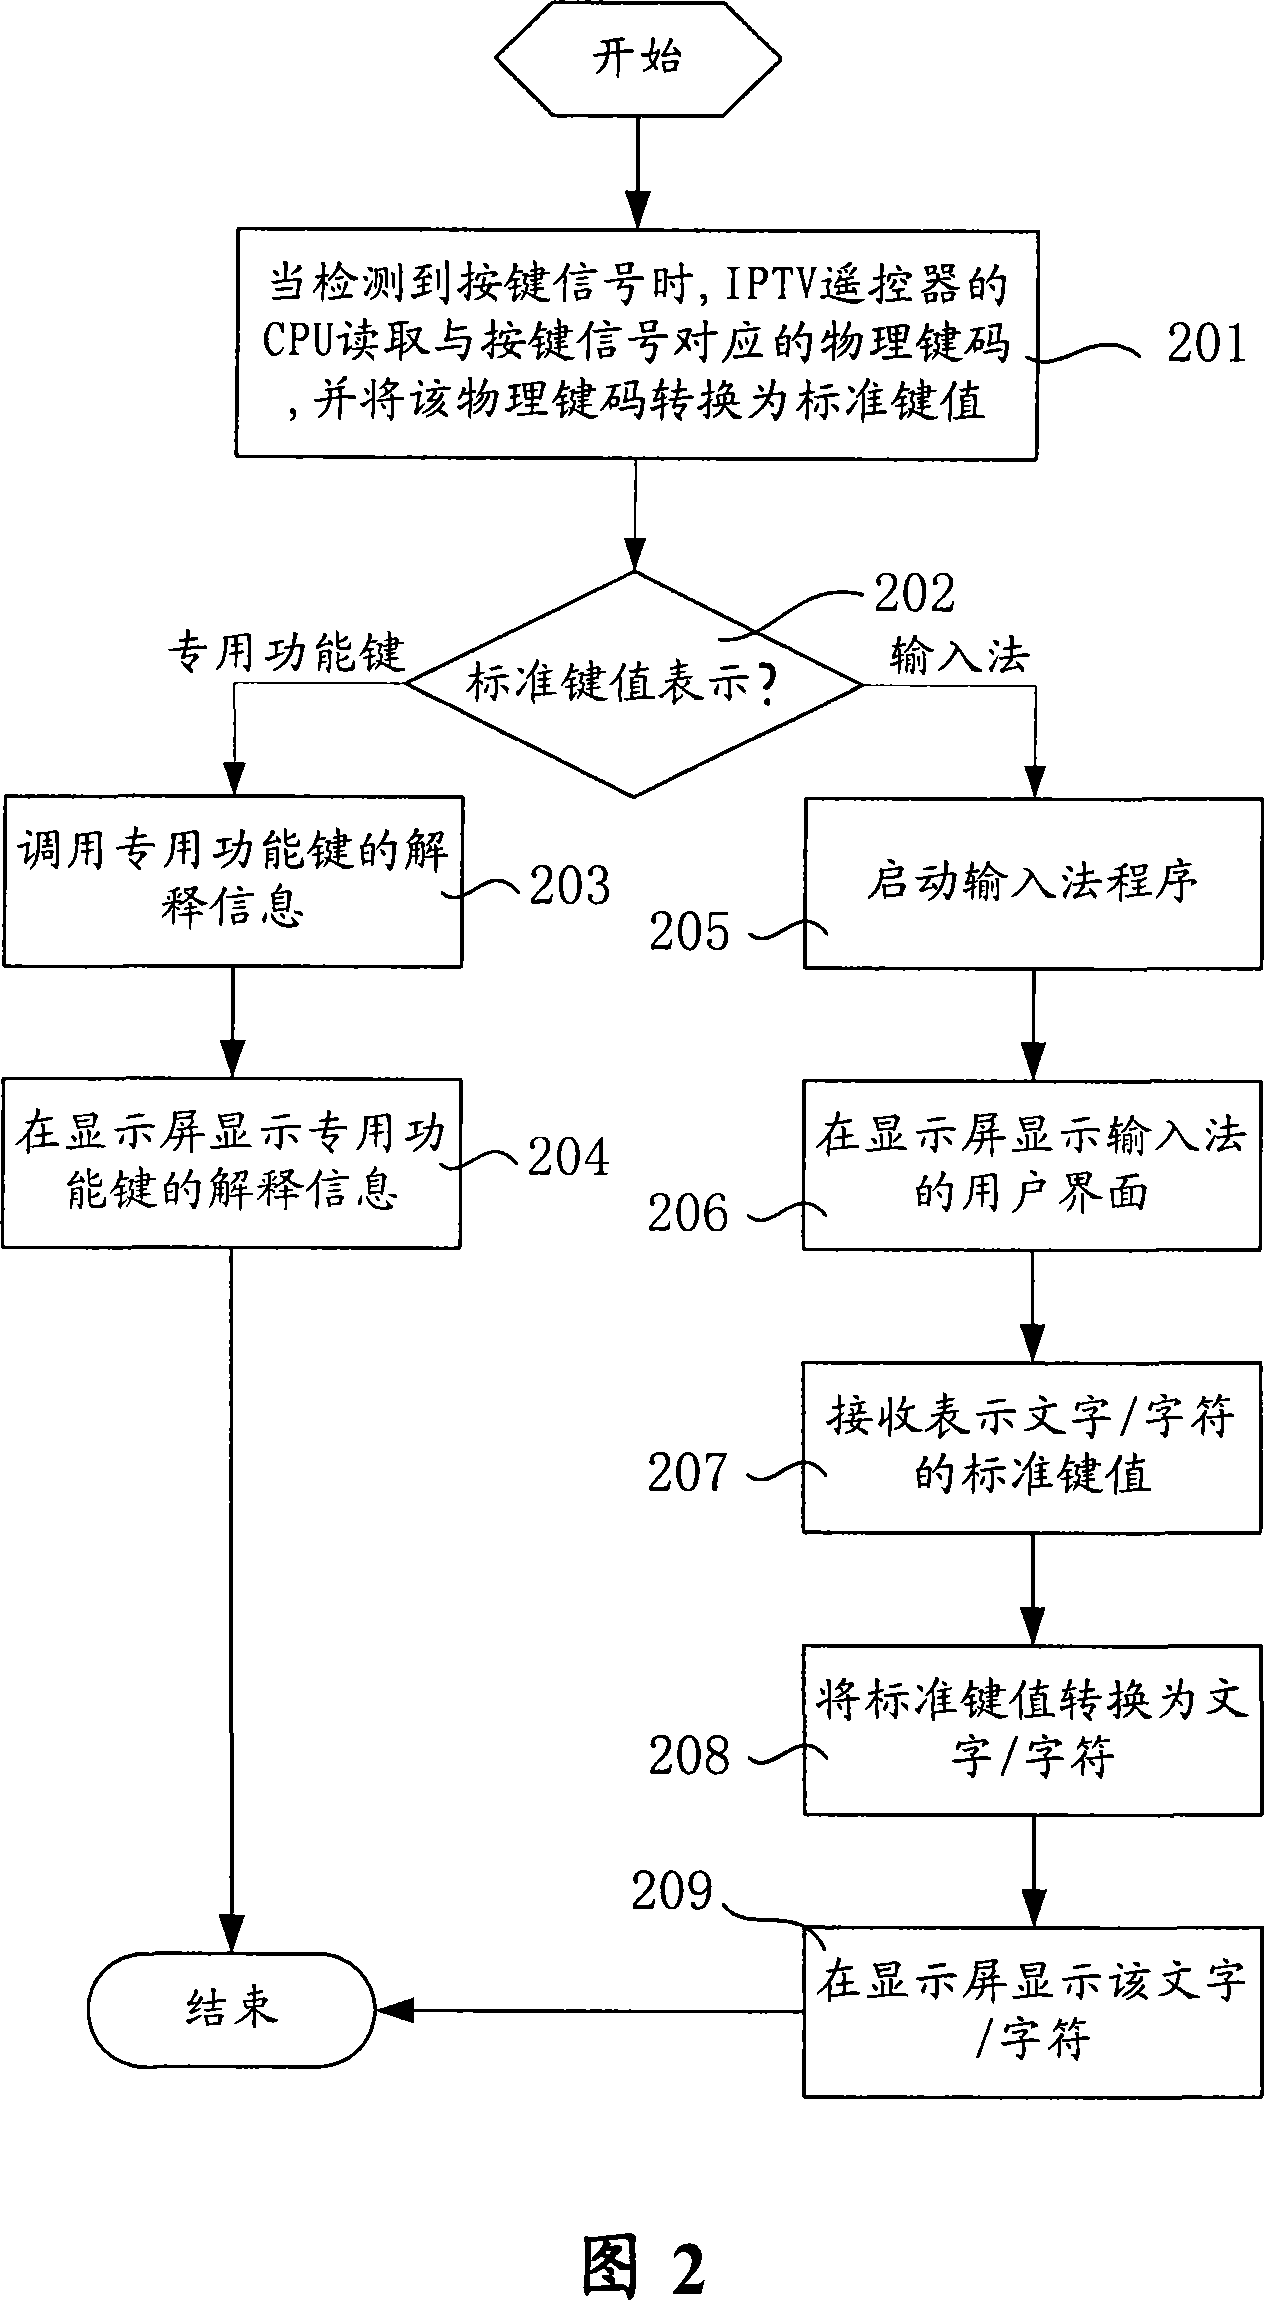 Information display method and device for IPTV remote controller